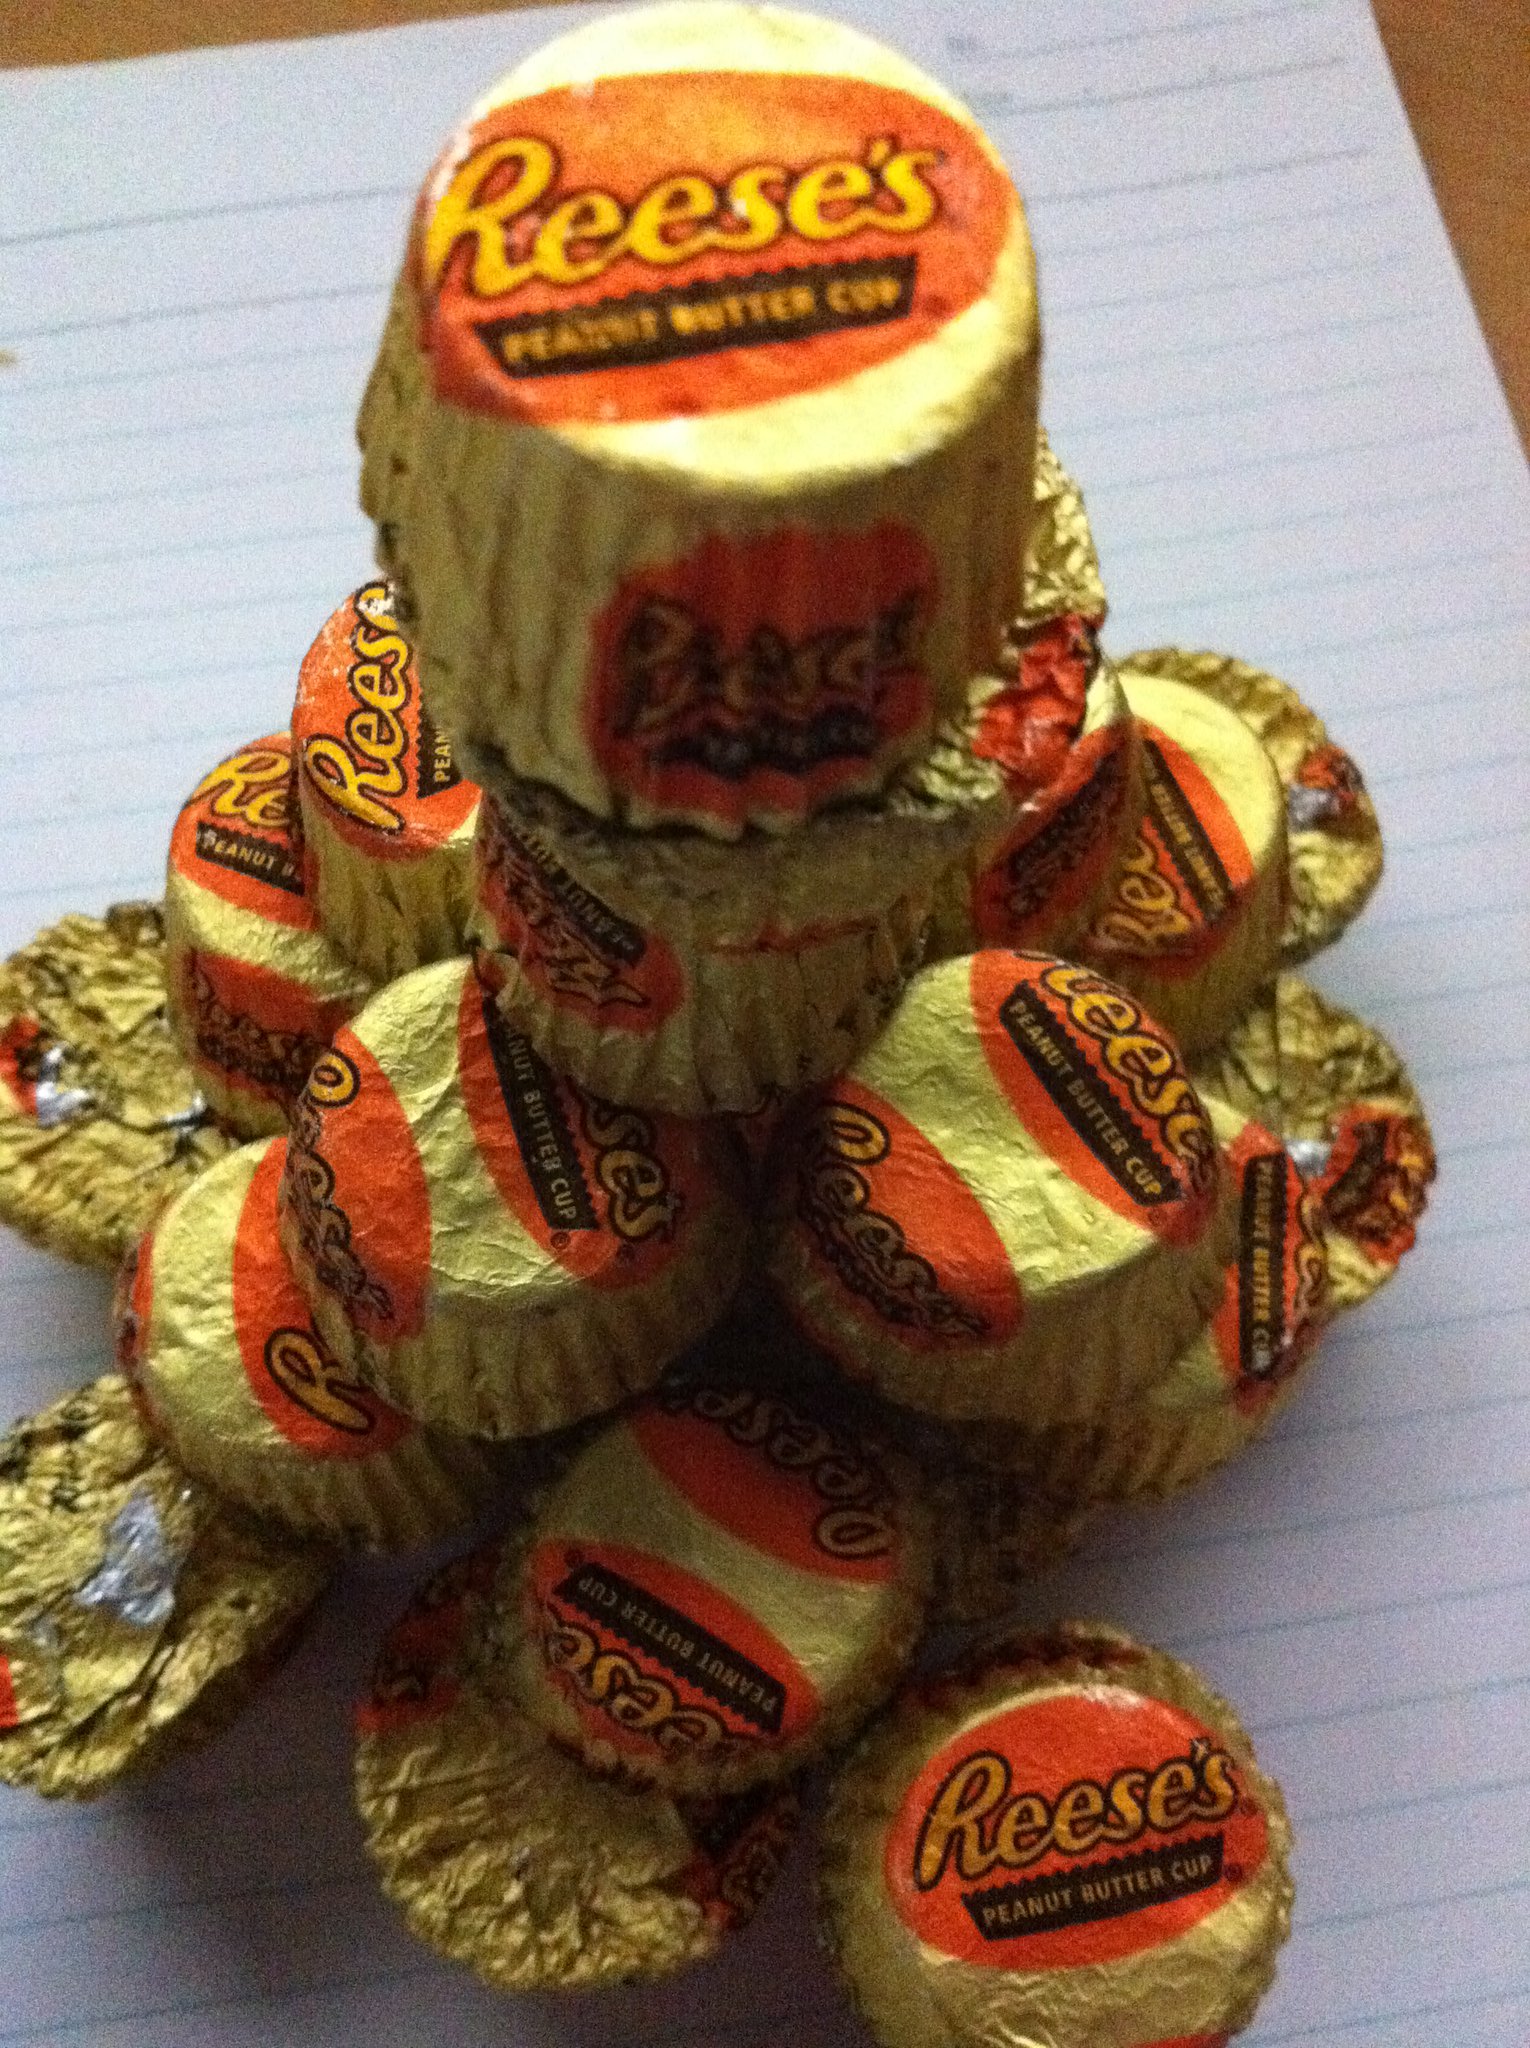 Stack of Reese's